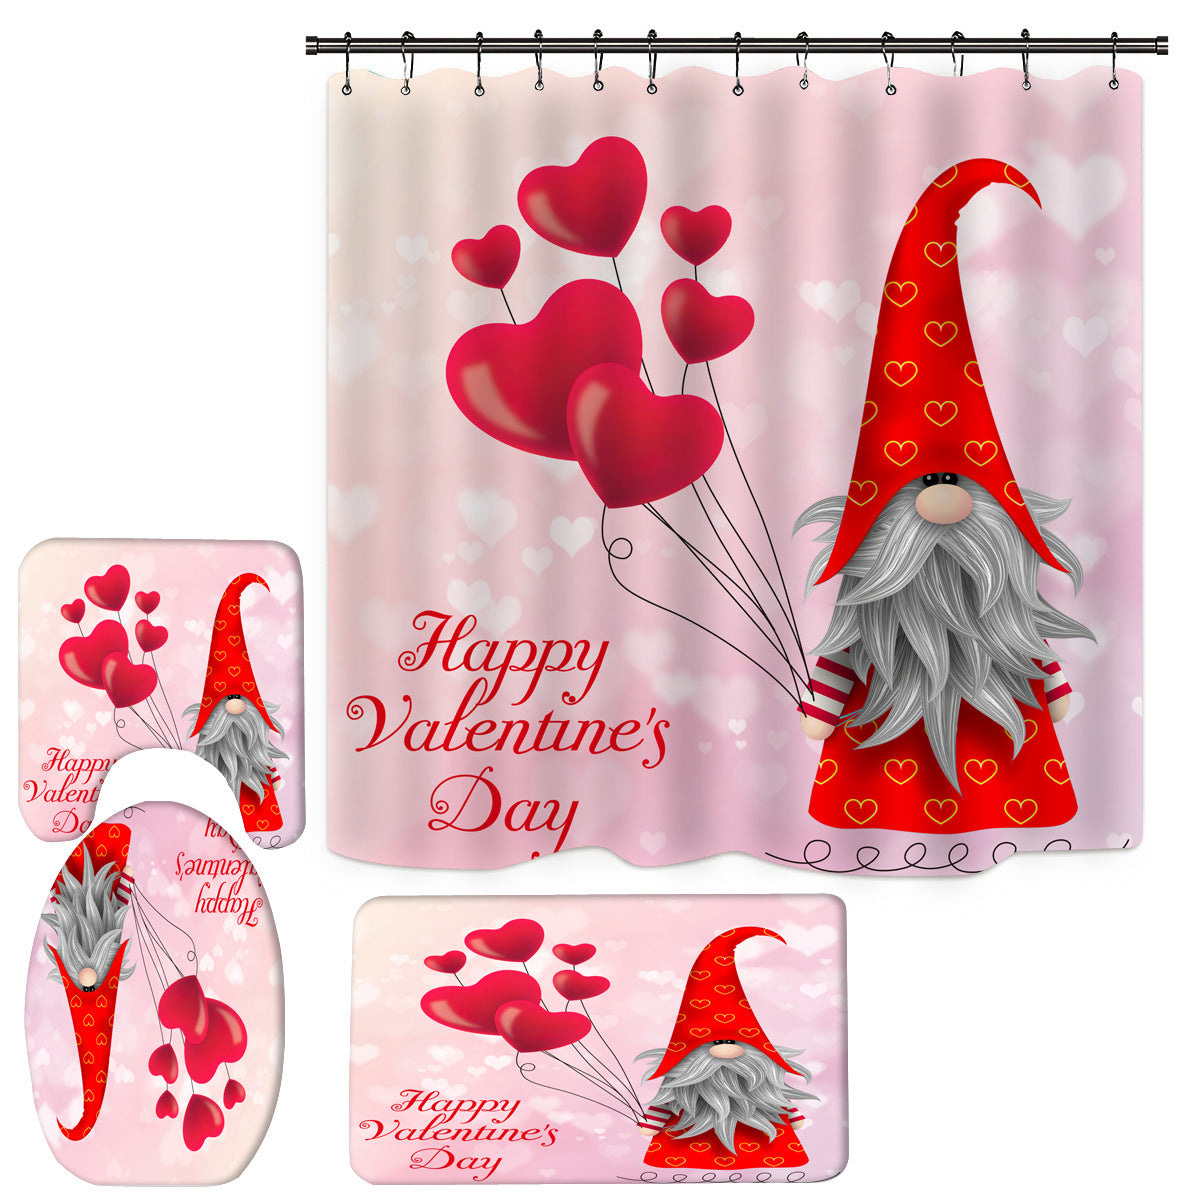 Happy Valentine's Day Fabric Shower Curtain Sets